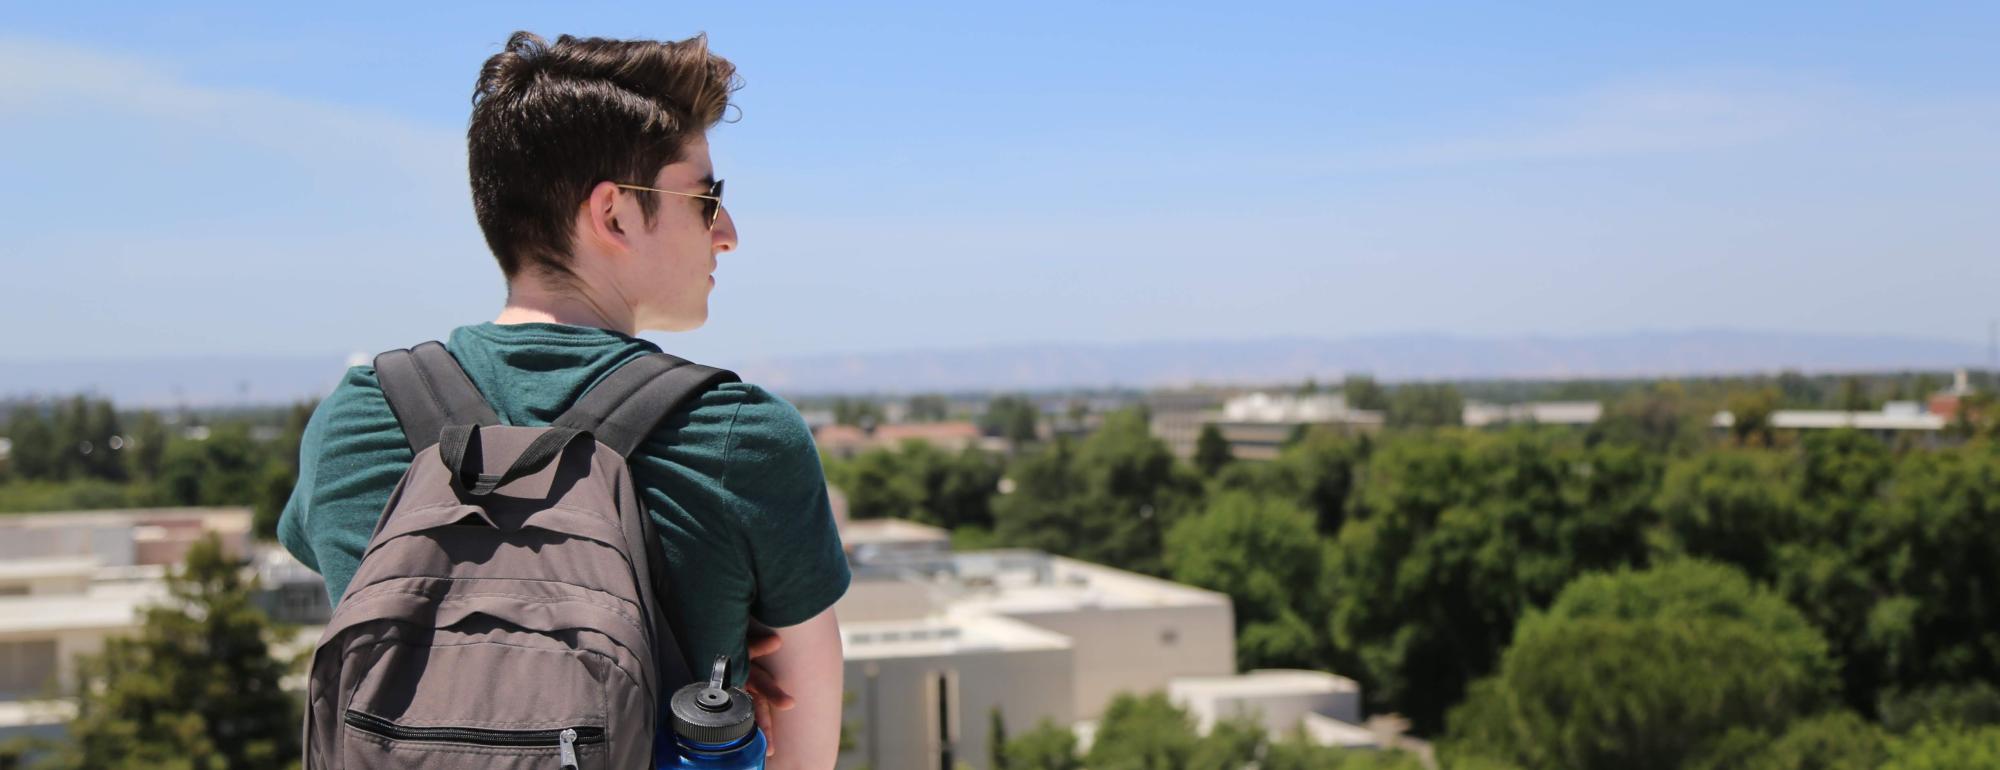 student looking off the horizon of a building roof